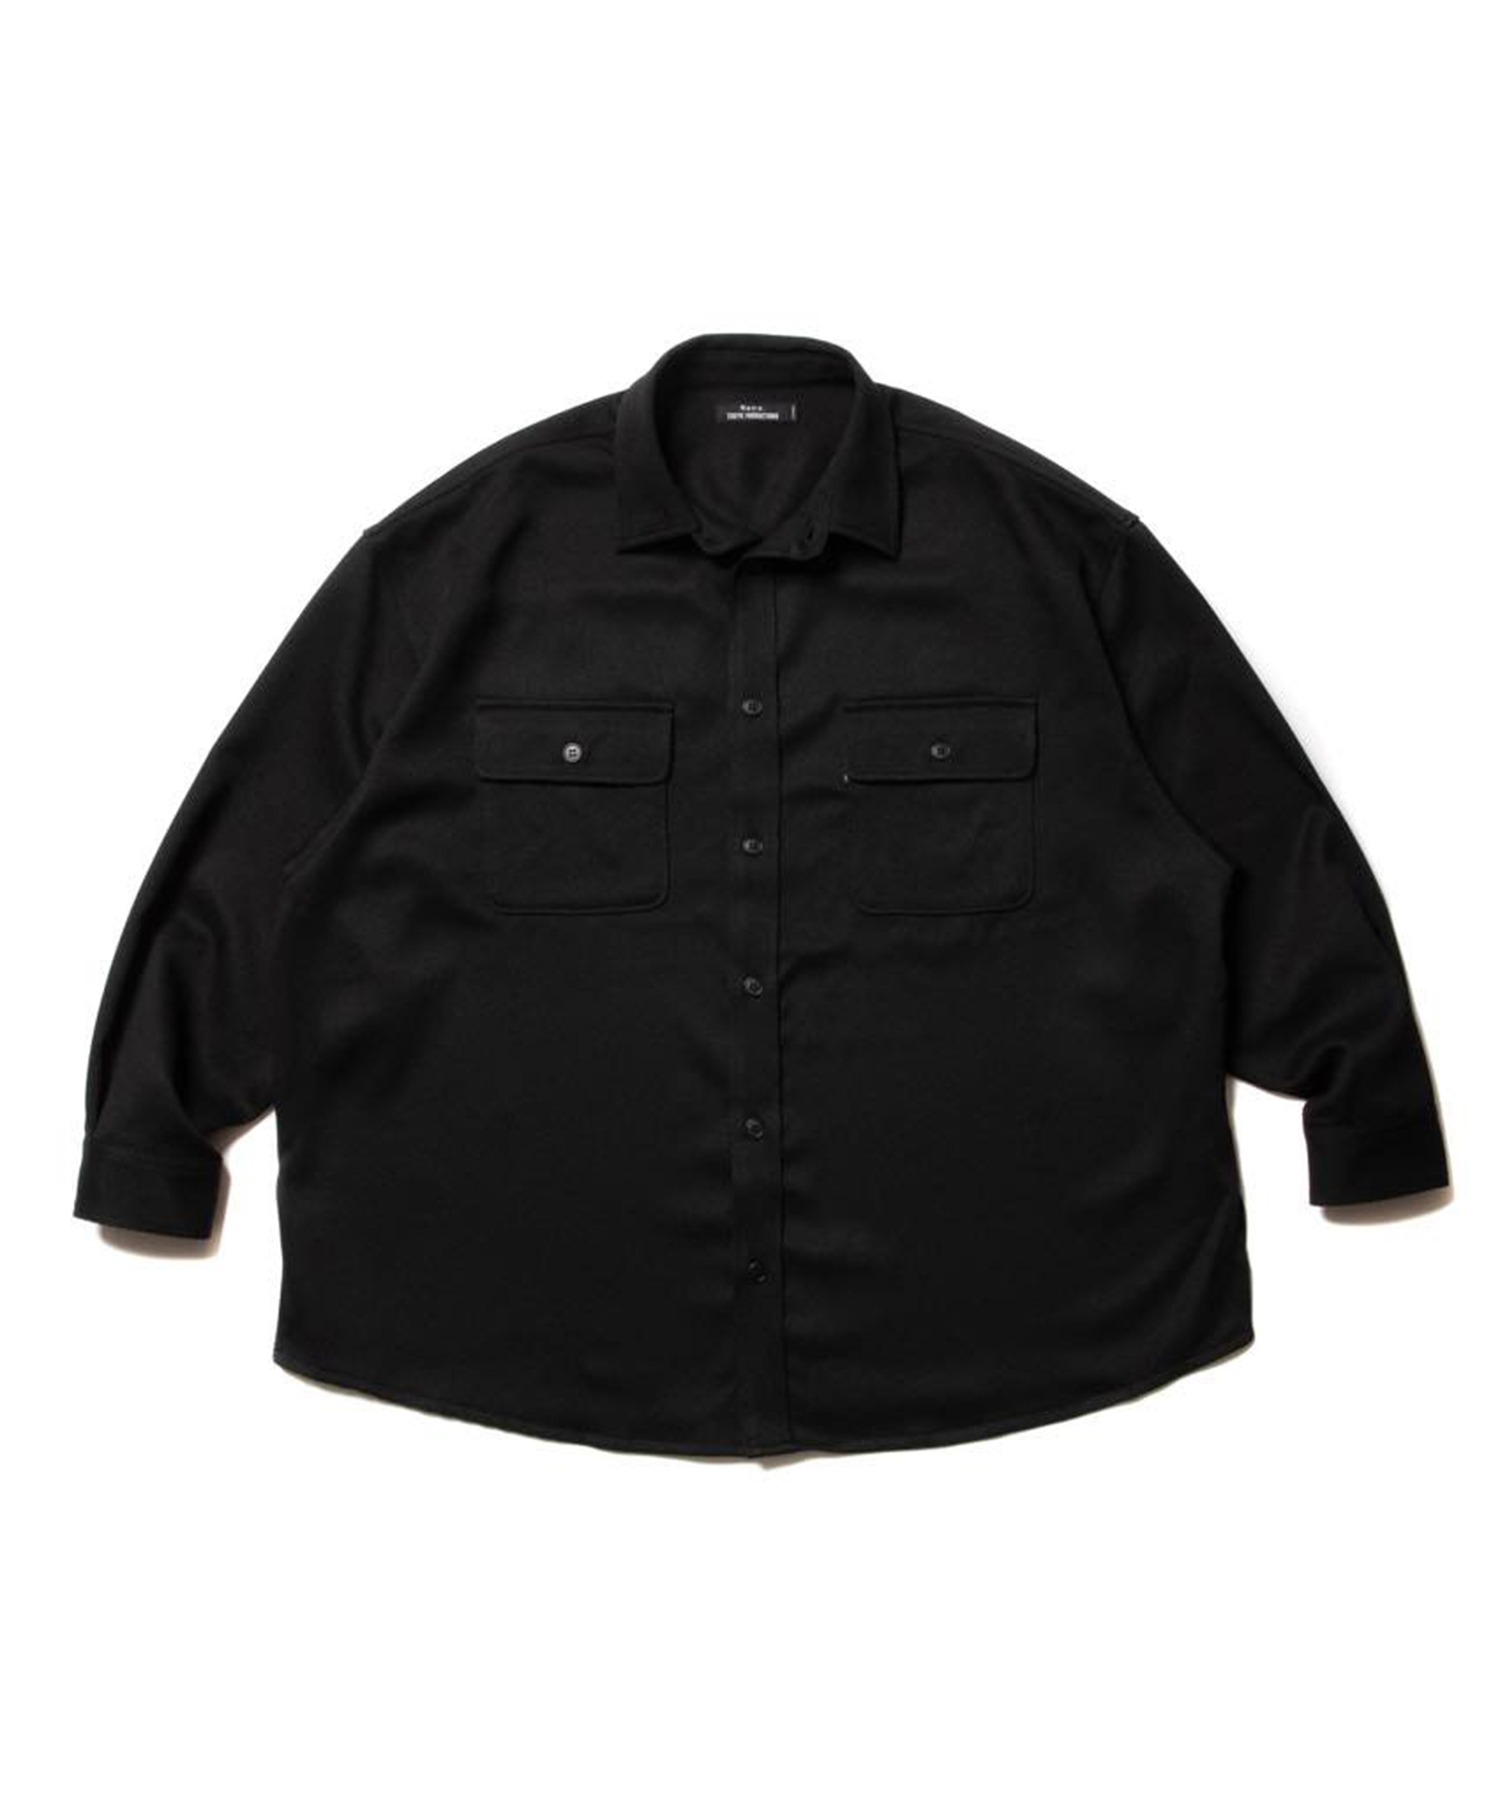 COOTIE PRODUCTIONSName. 最大75%OFFクーポン with PRODUCTIONS 【30％OFF】 POLYESTER FIT ERROR SHIRT CPO KERSEY